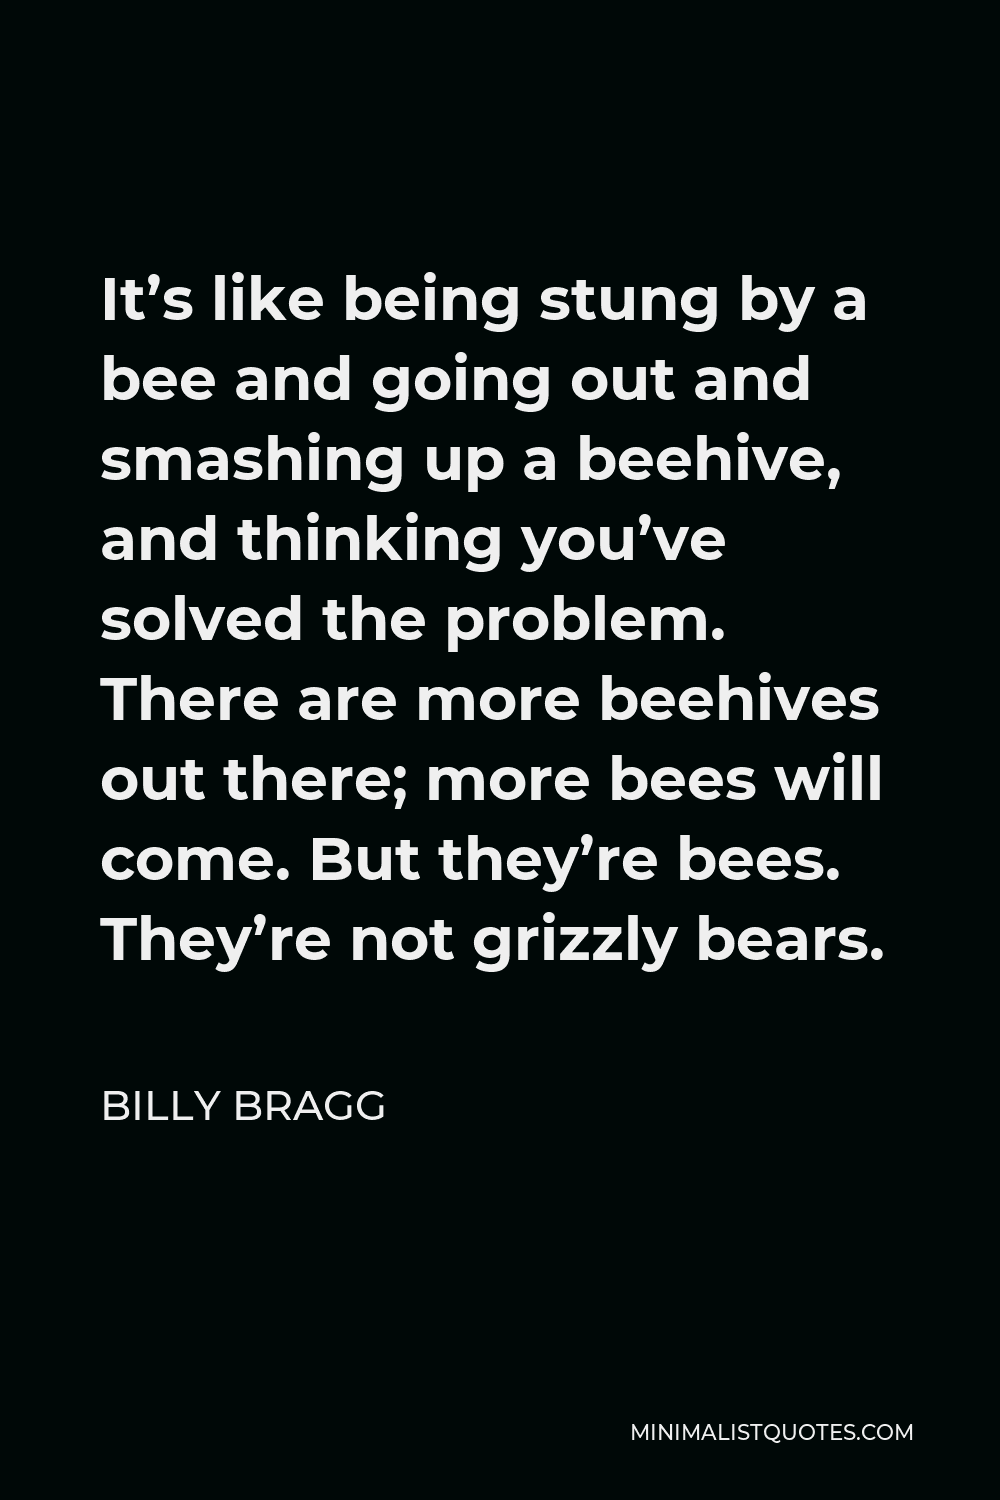 Billy Bragg Quote - It’s like being stung by a bee and going out and smashing up a beehive, and thinking you’ve solved the problem. There are more beehives out there; more bees will come. But they’re bees. They’re not grizzly bears.